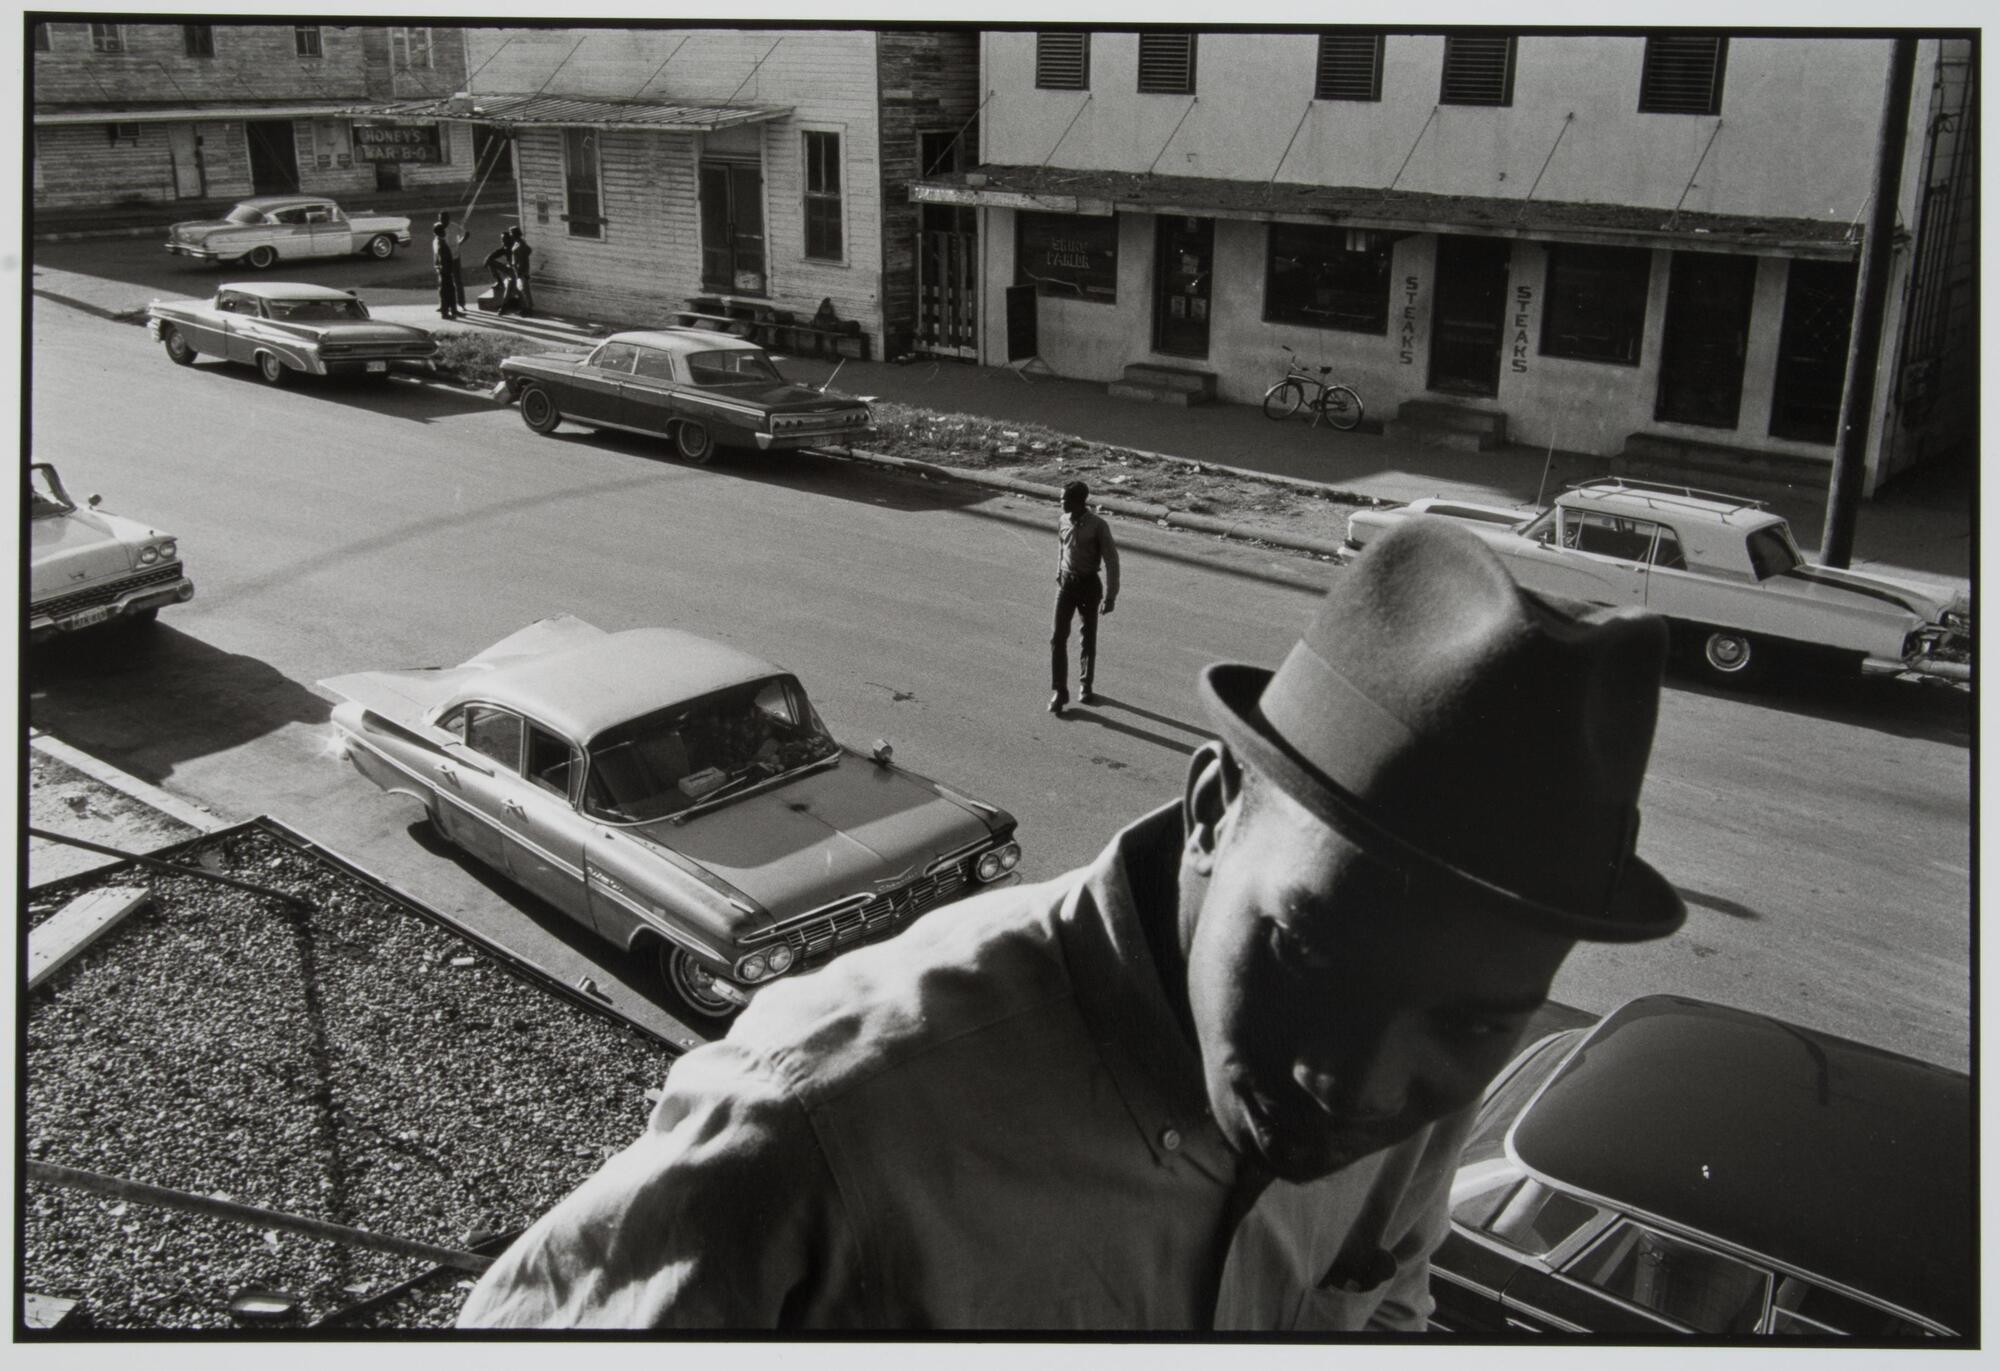 A photograph taken from a roof. In the foreground, an African American man stands on the roof wearing a jacket and hat. A street lined with cars and a lone pedestrian are visible below.